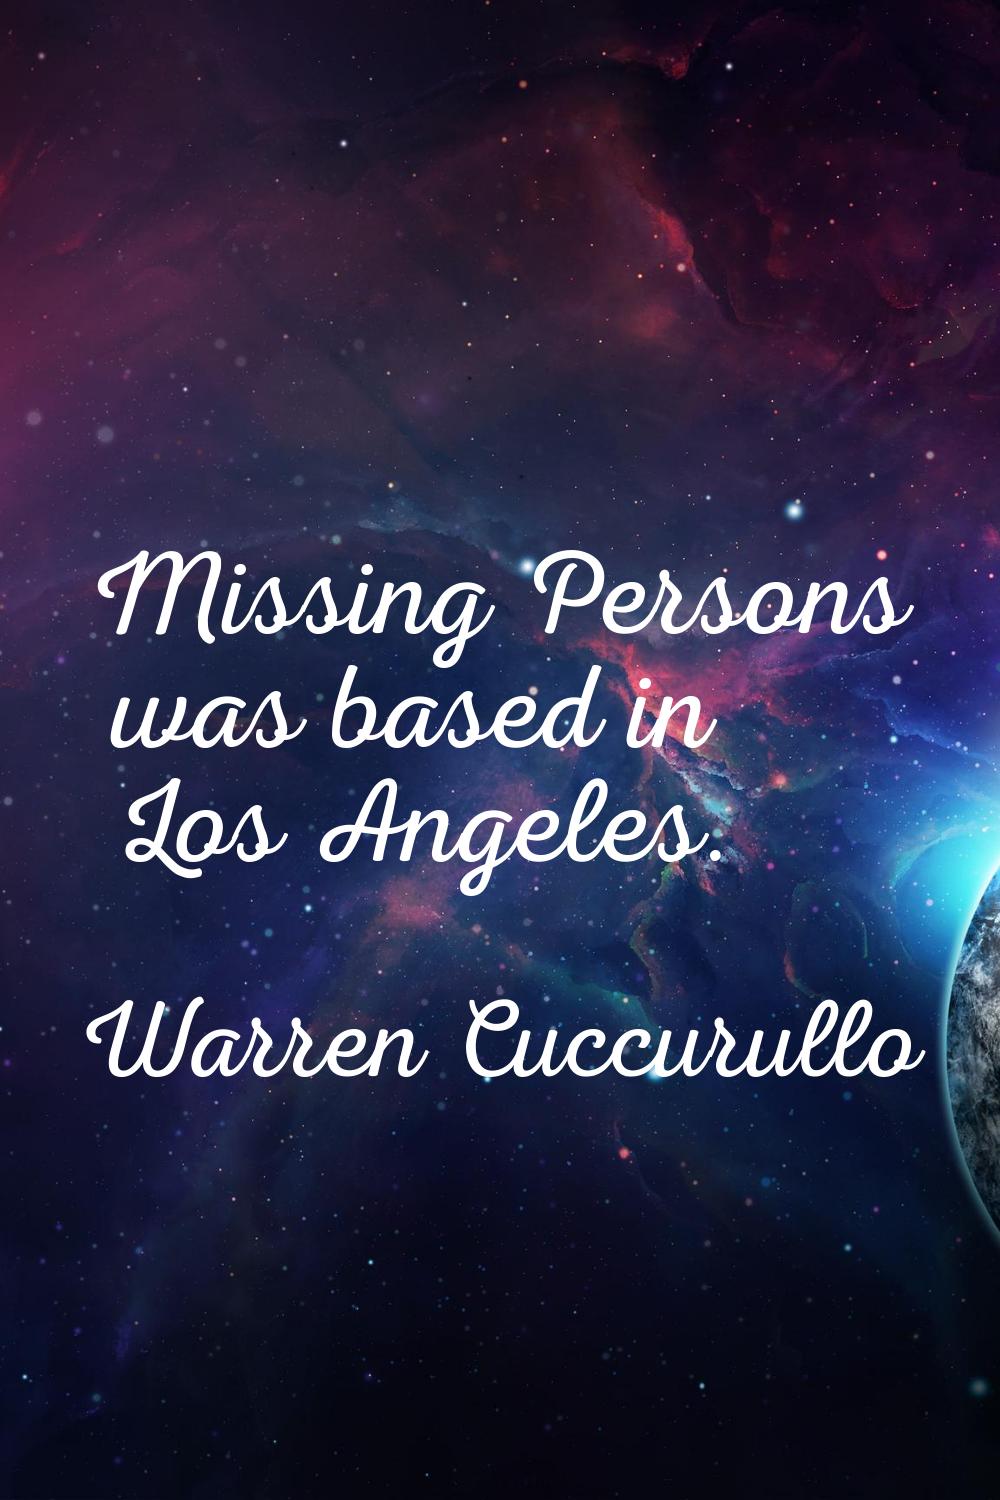 Missing Persons was based in Los Angeles.